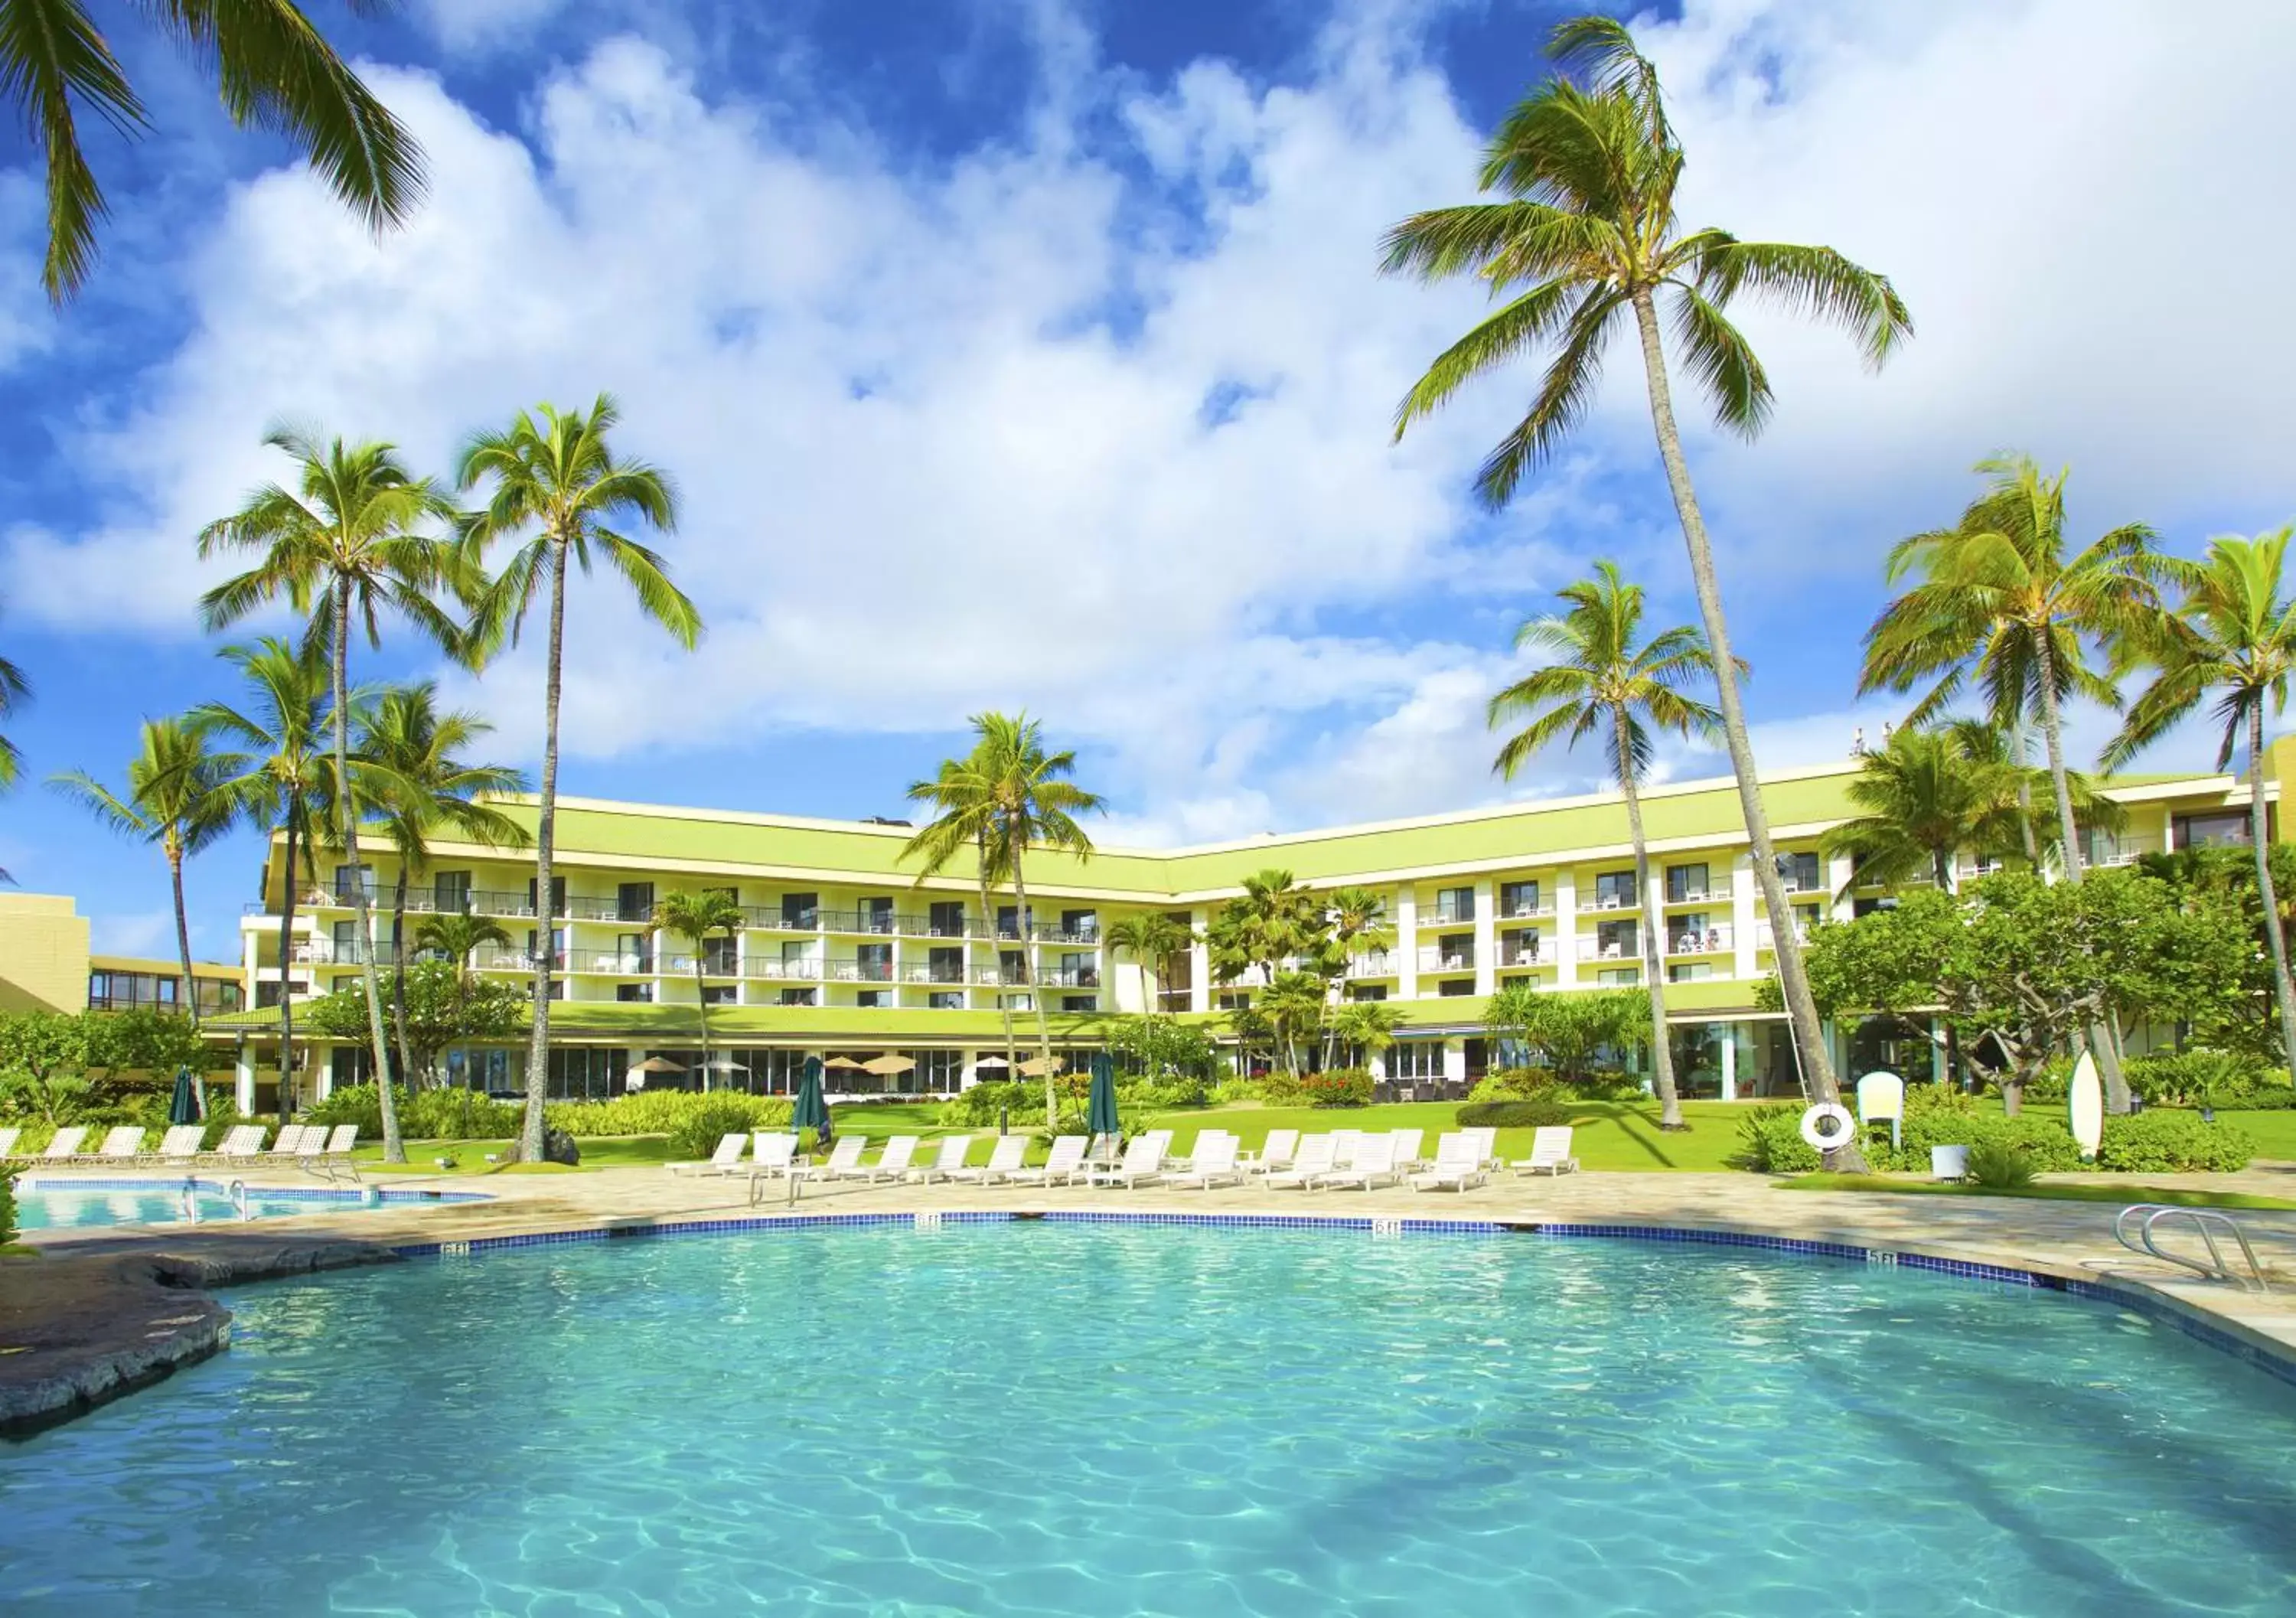 Property building, Swimming Pool in OUTRIGGER Kaua'i Beach Resort & Spa